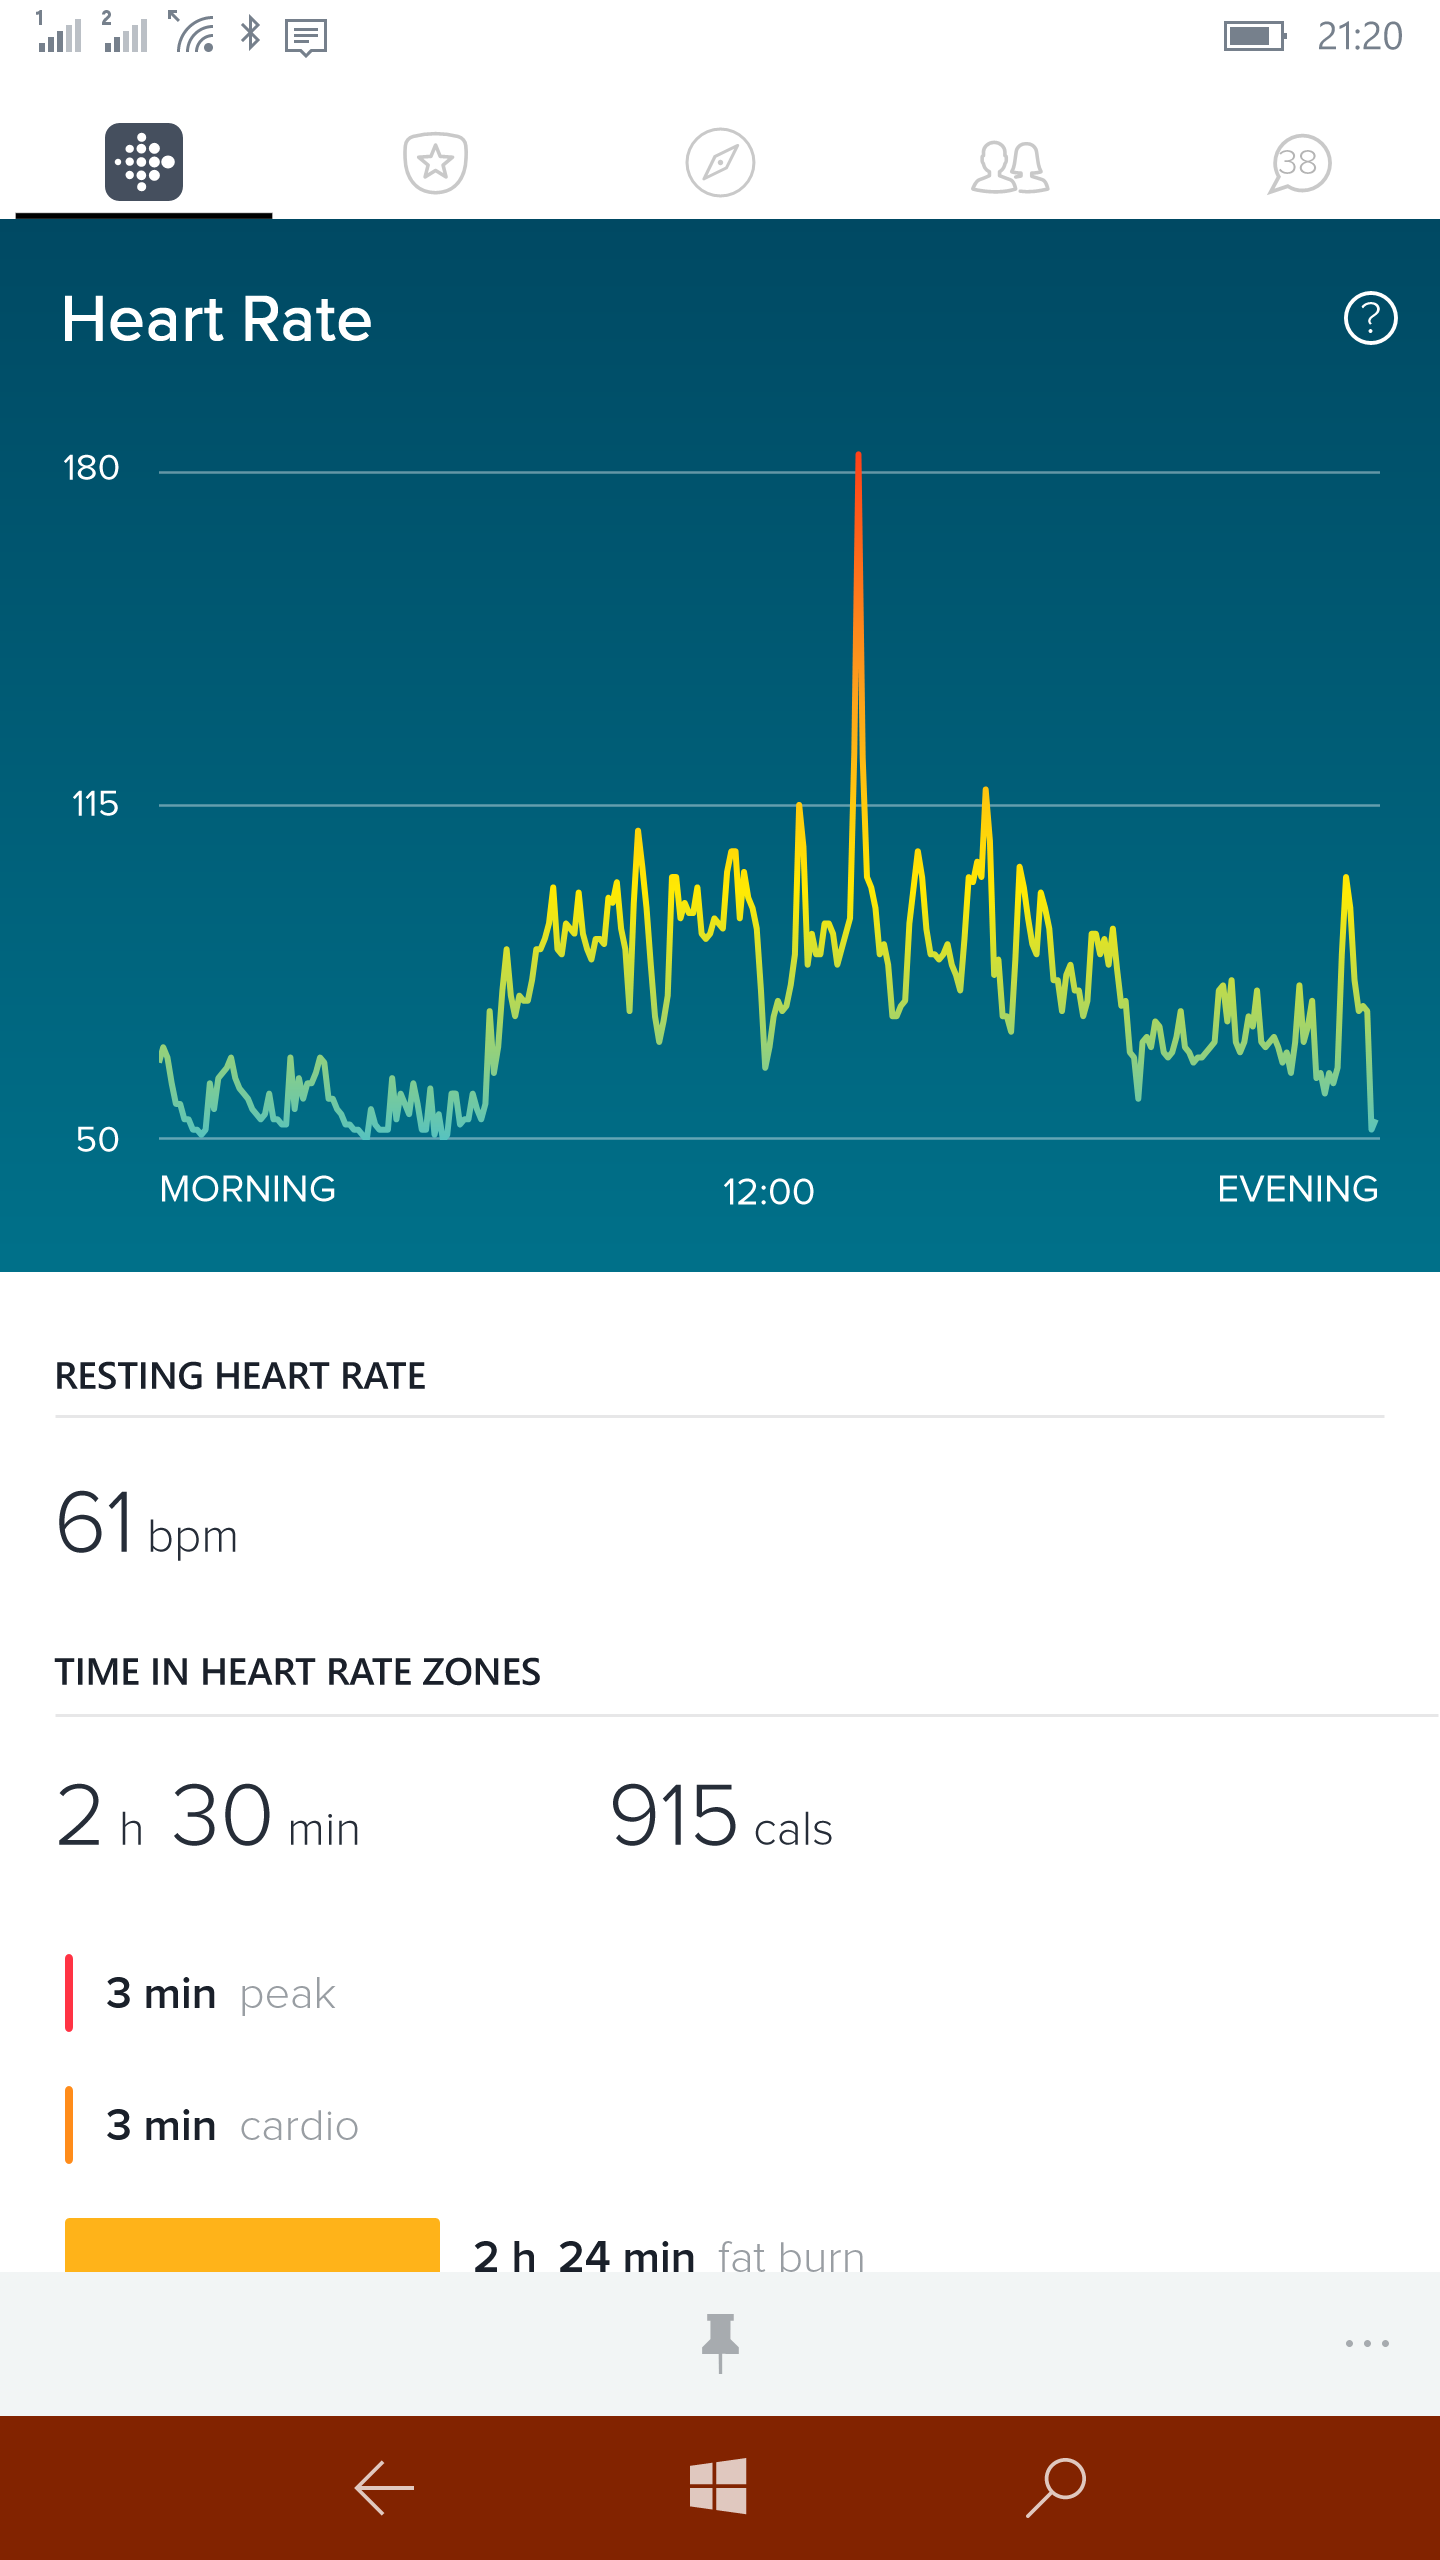 Unusual high spikes in heart rate. False reading, or ...